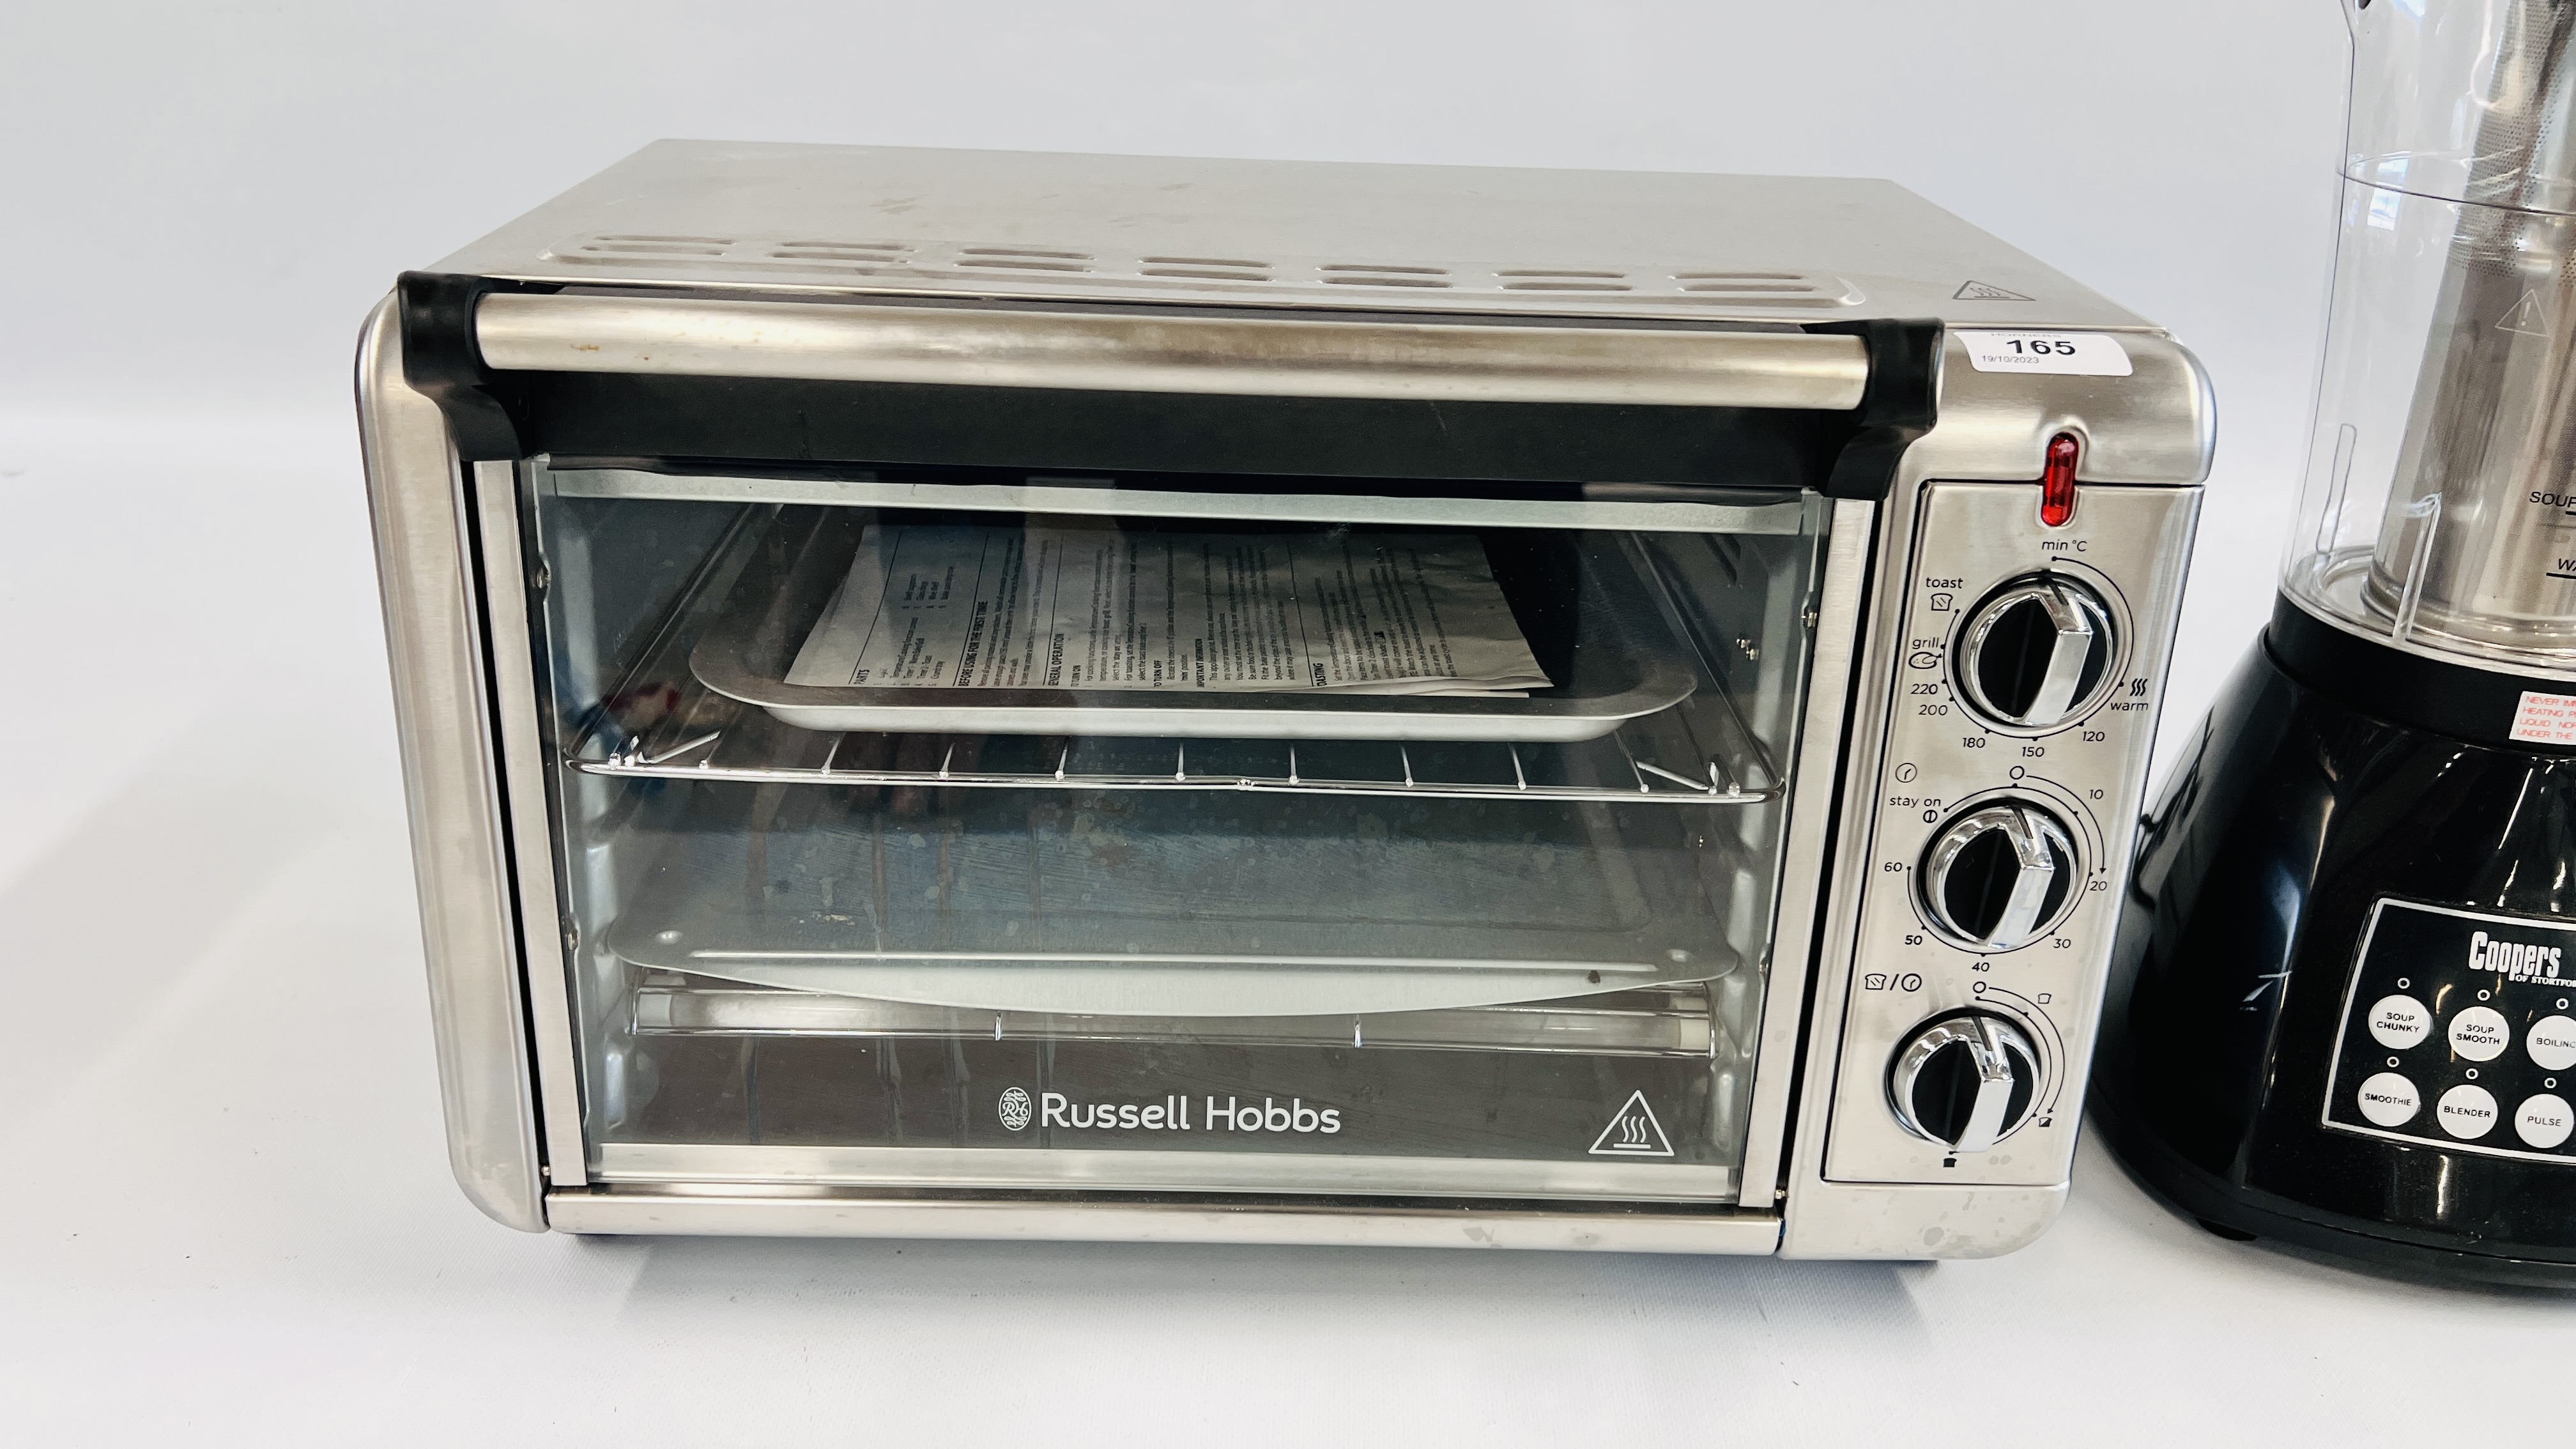 RUSSELL HOBBS STAINLESS STEEL TABLE TOP OVEN, COOPERS COMBI BLENDER, - Image 7 of 9